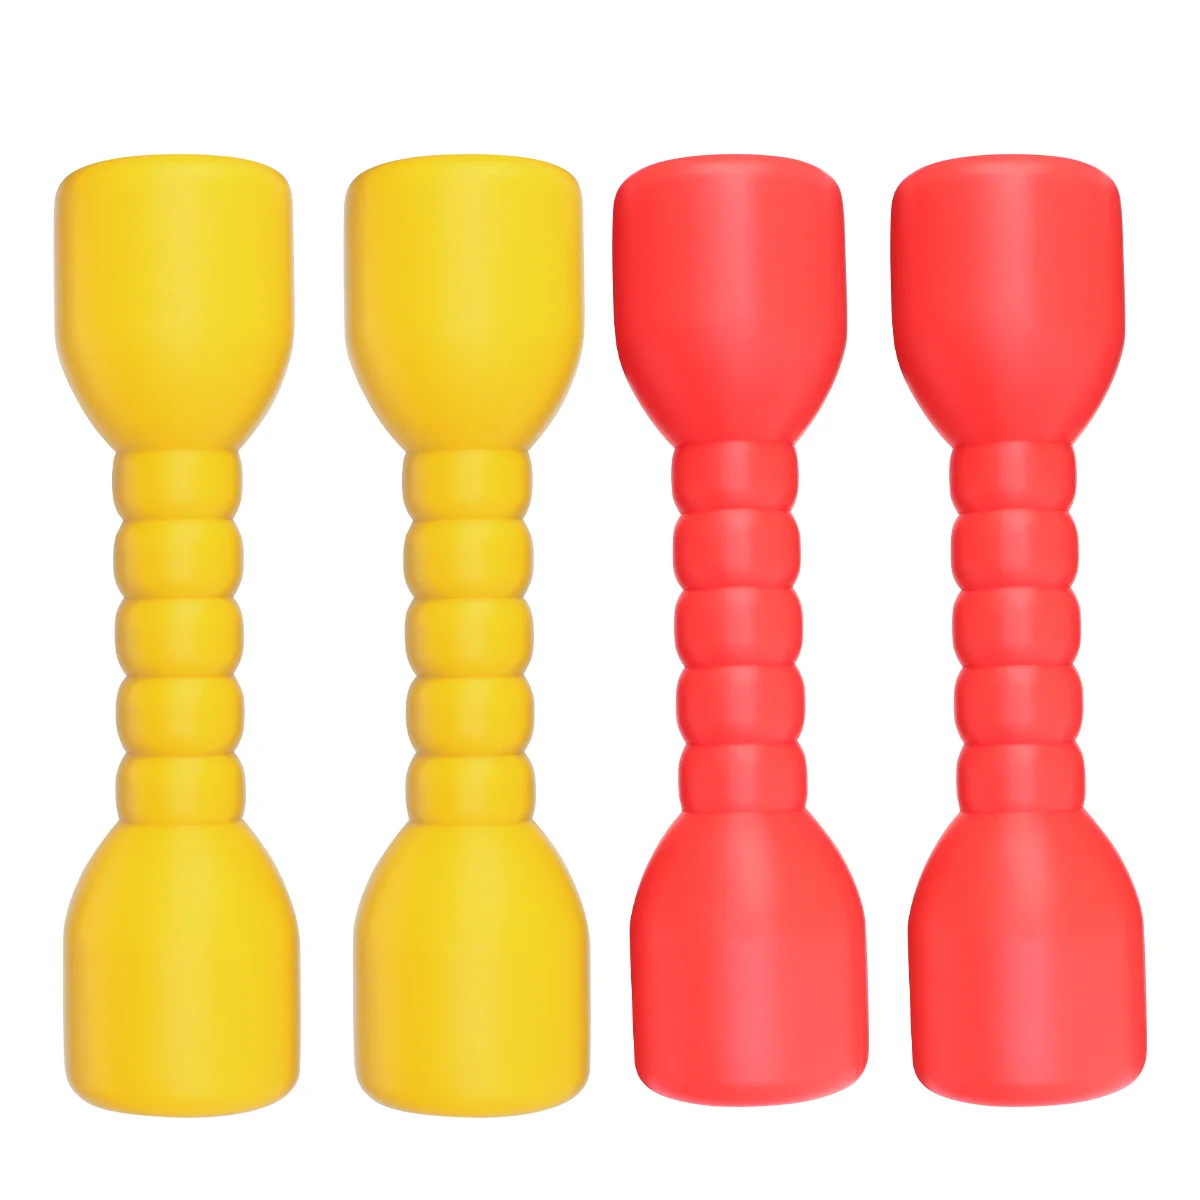 

2 Pairs Kids Hand Dumbbells Adjustable Gym Exercise Barbell Fitness Toys For Kids Beginner Gym Workout Weightlifting Exercise (